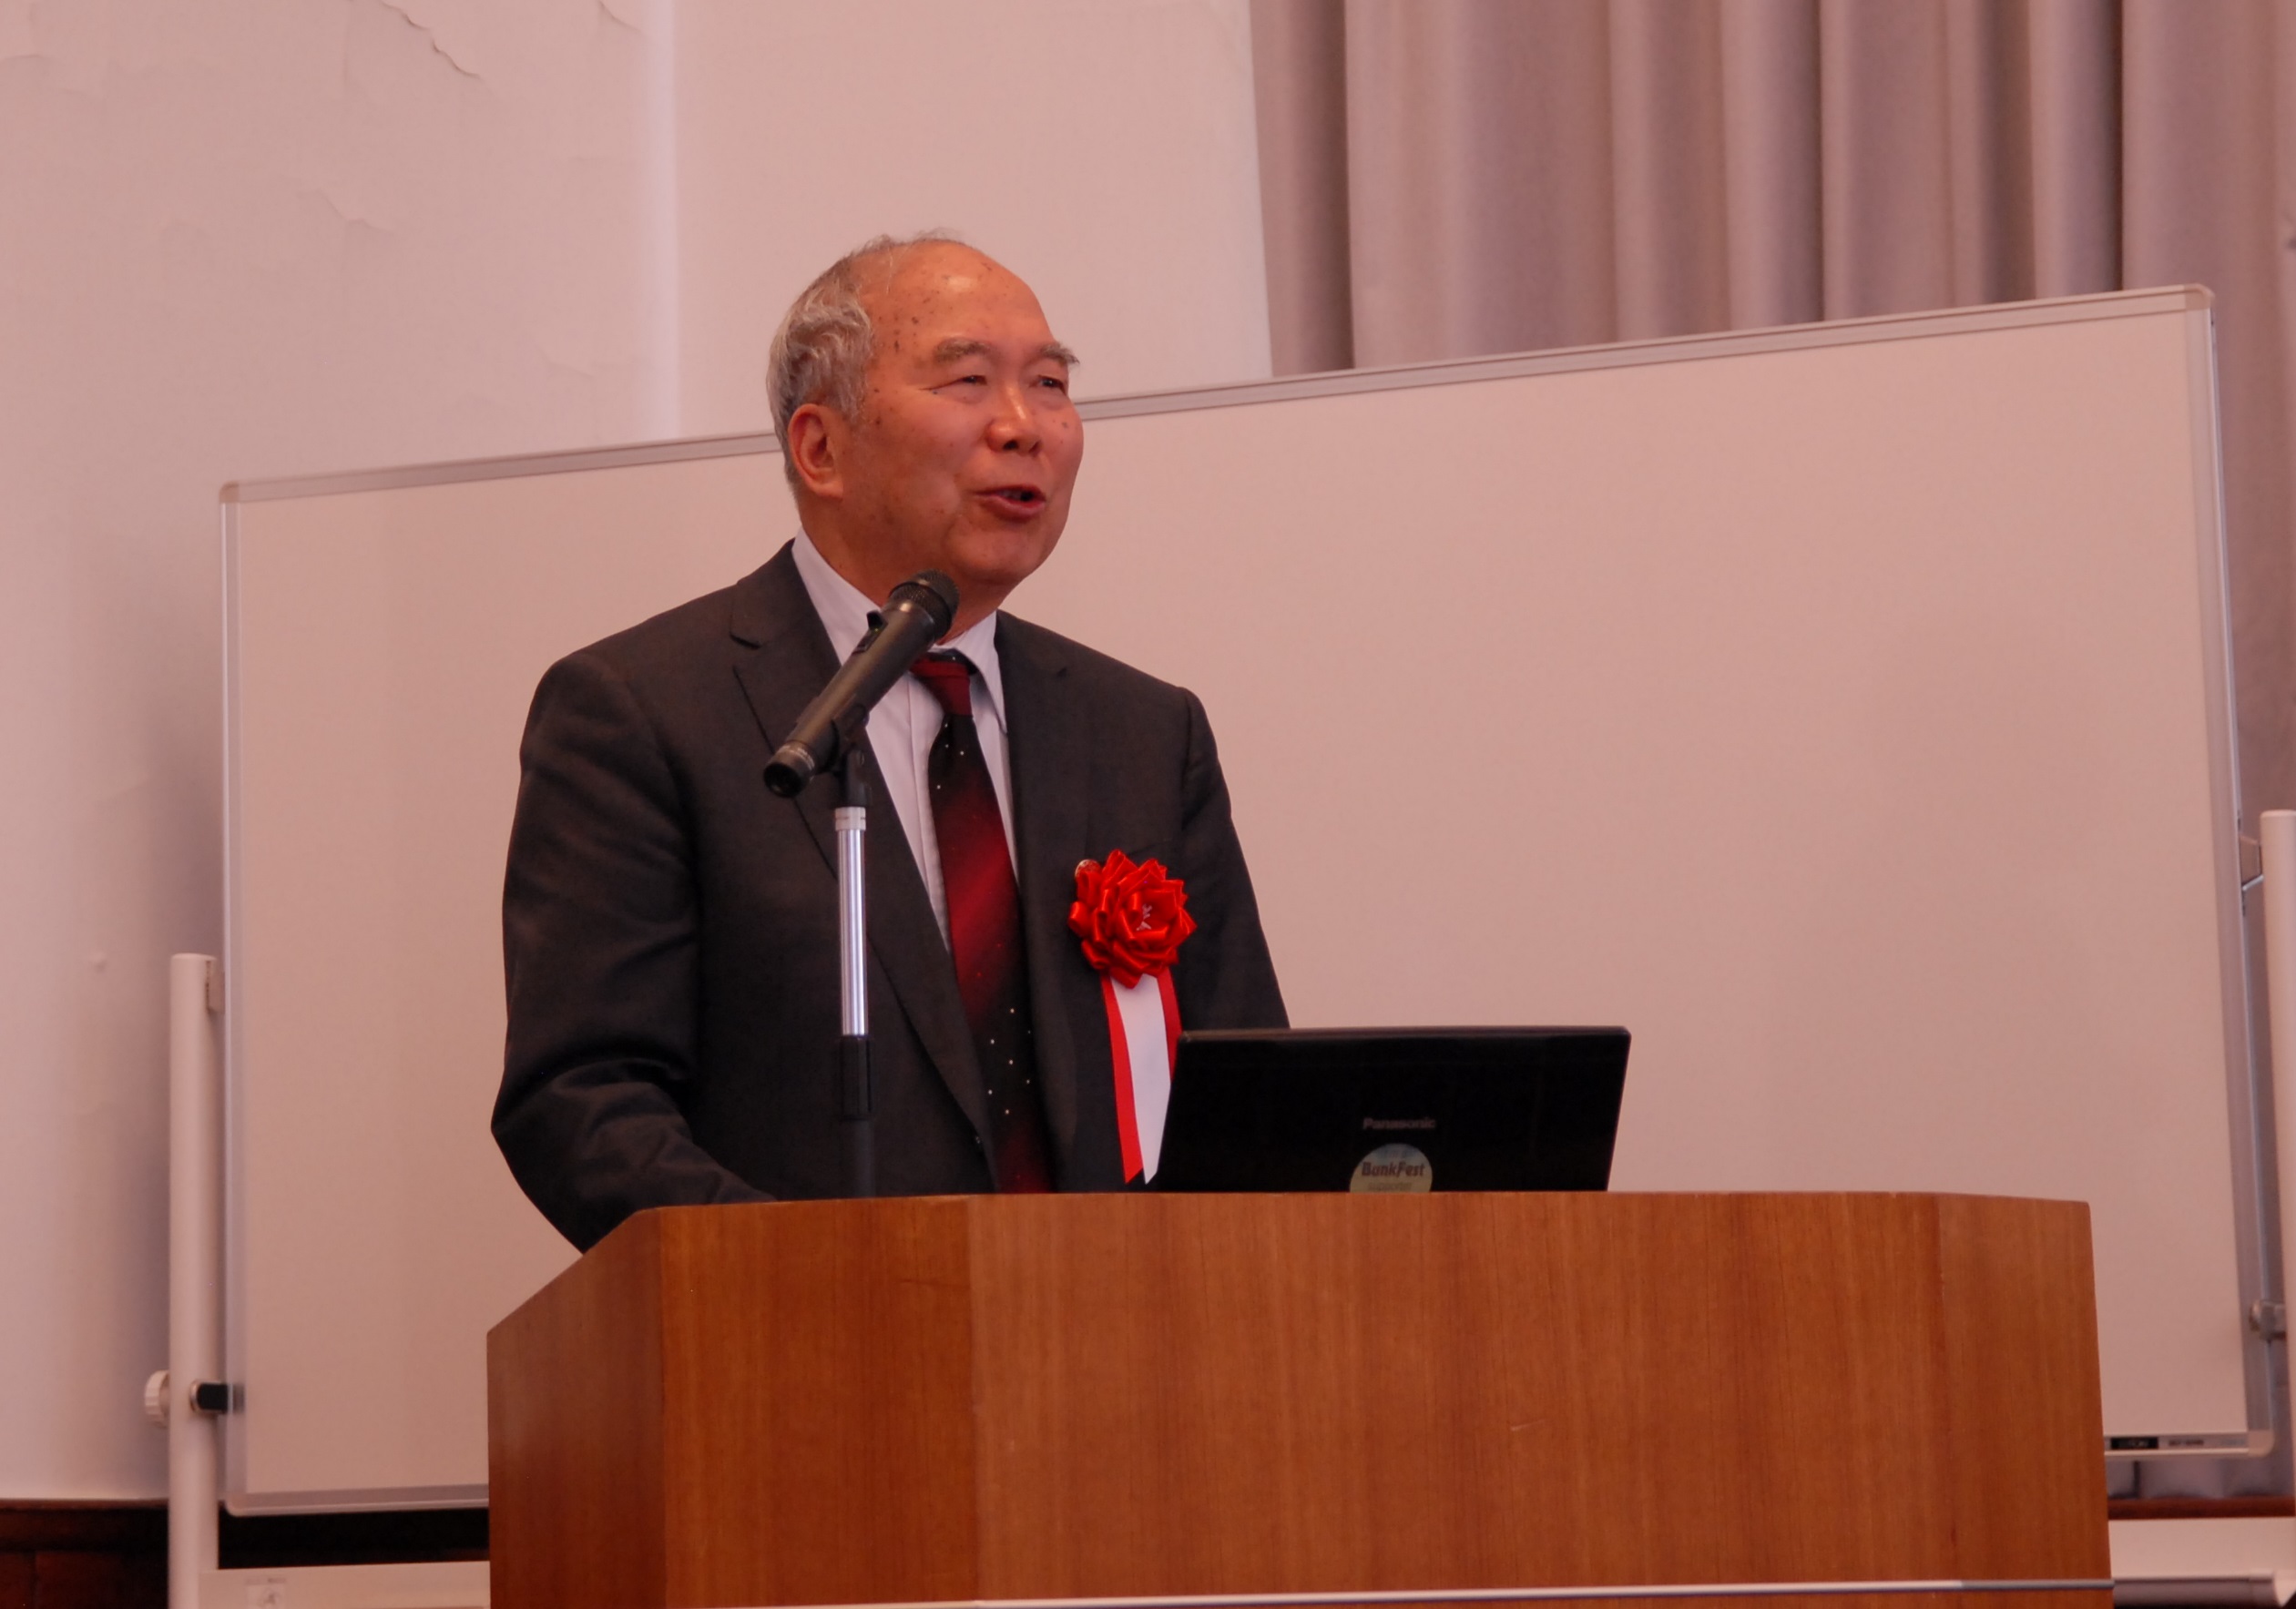 Professor and Member of Chinese Academy of Engineering, Hao Jiming